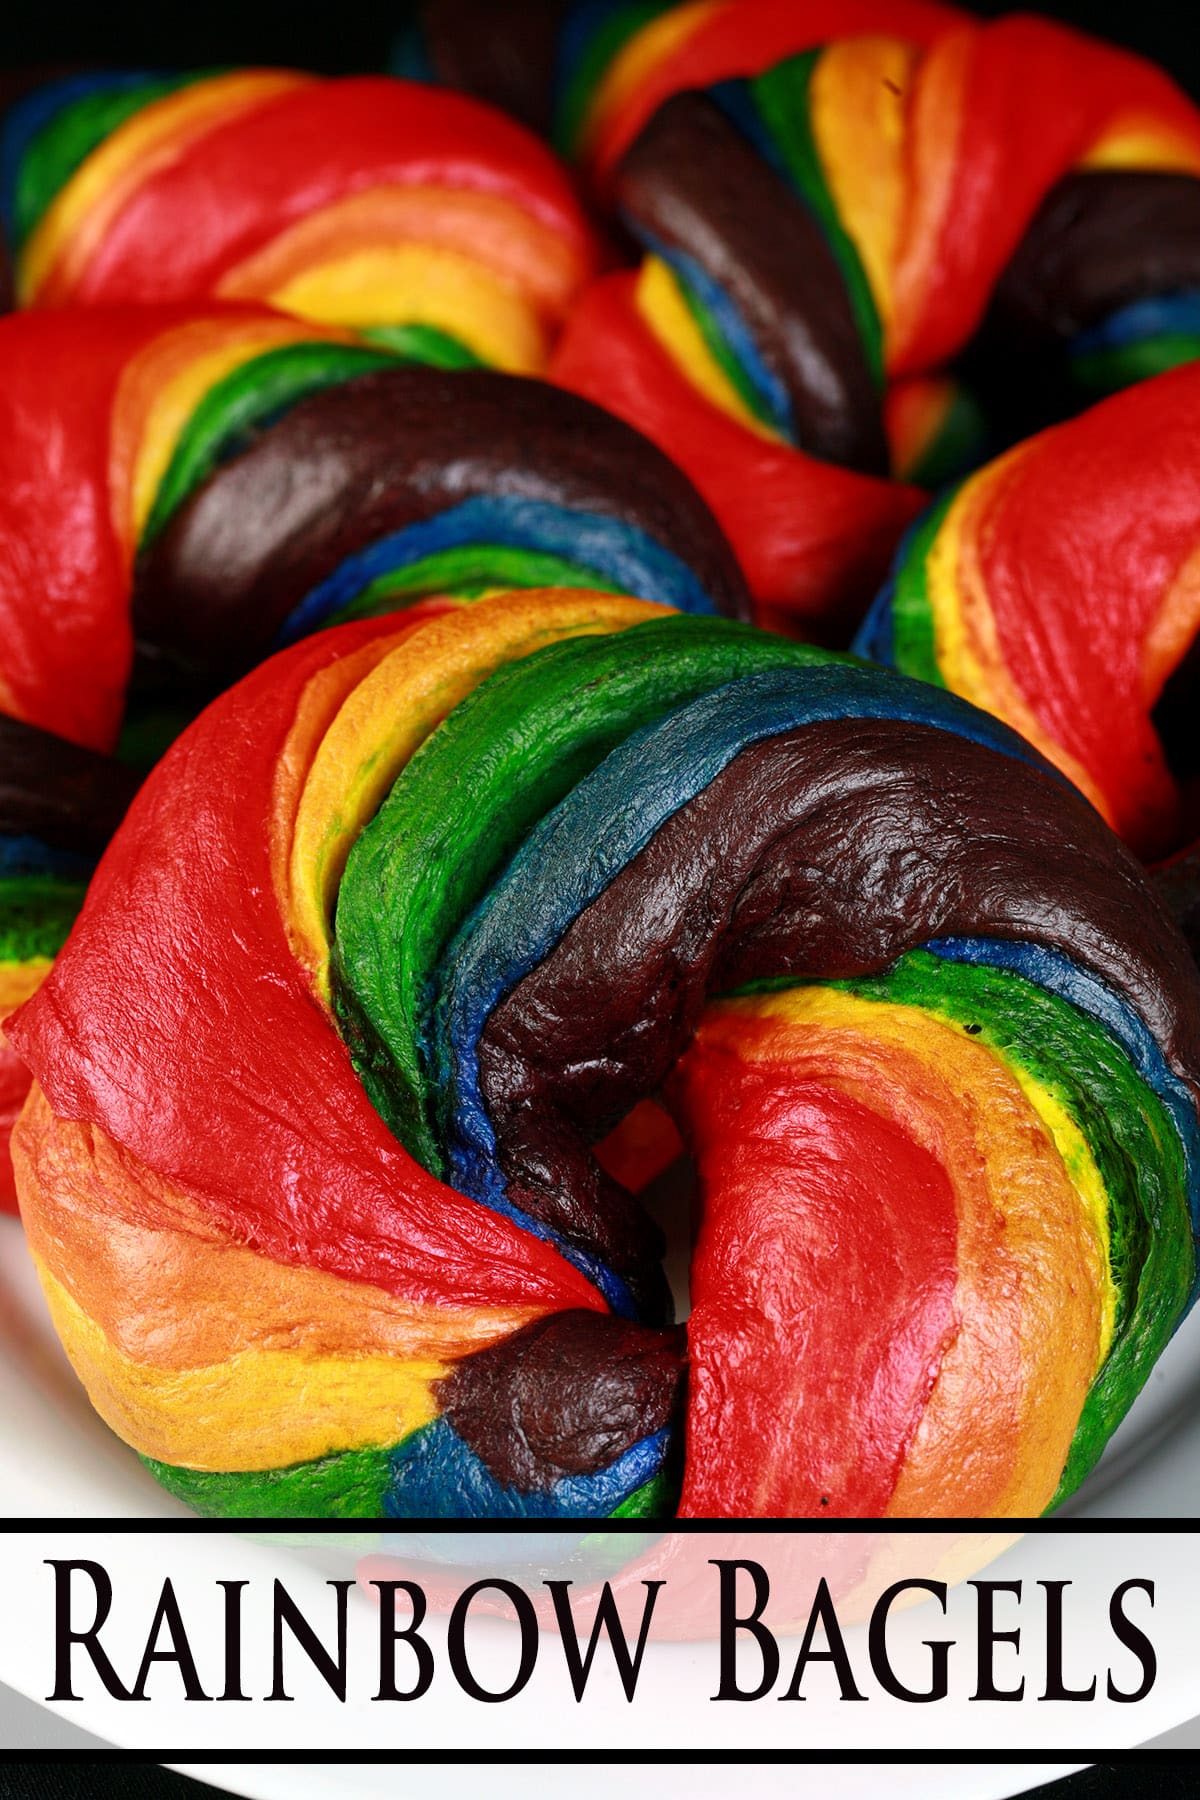 A platter of brightly coloured homemade rainbow bagels.